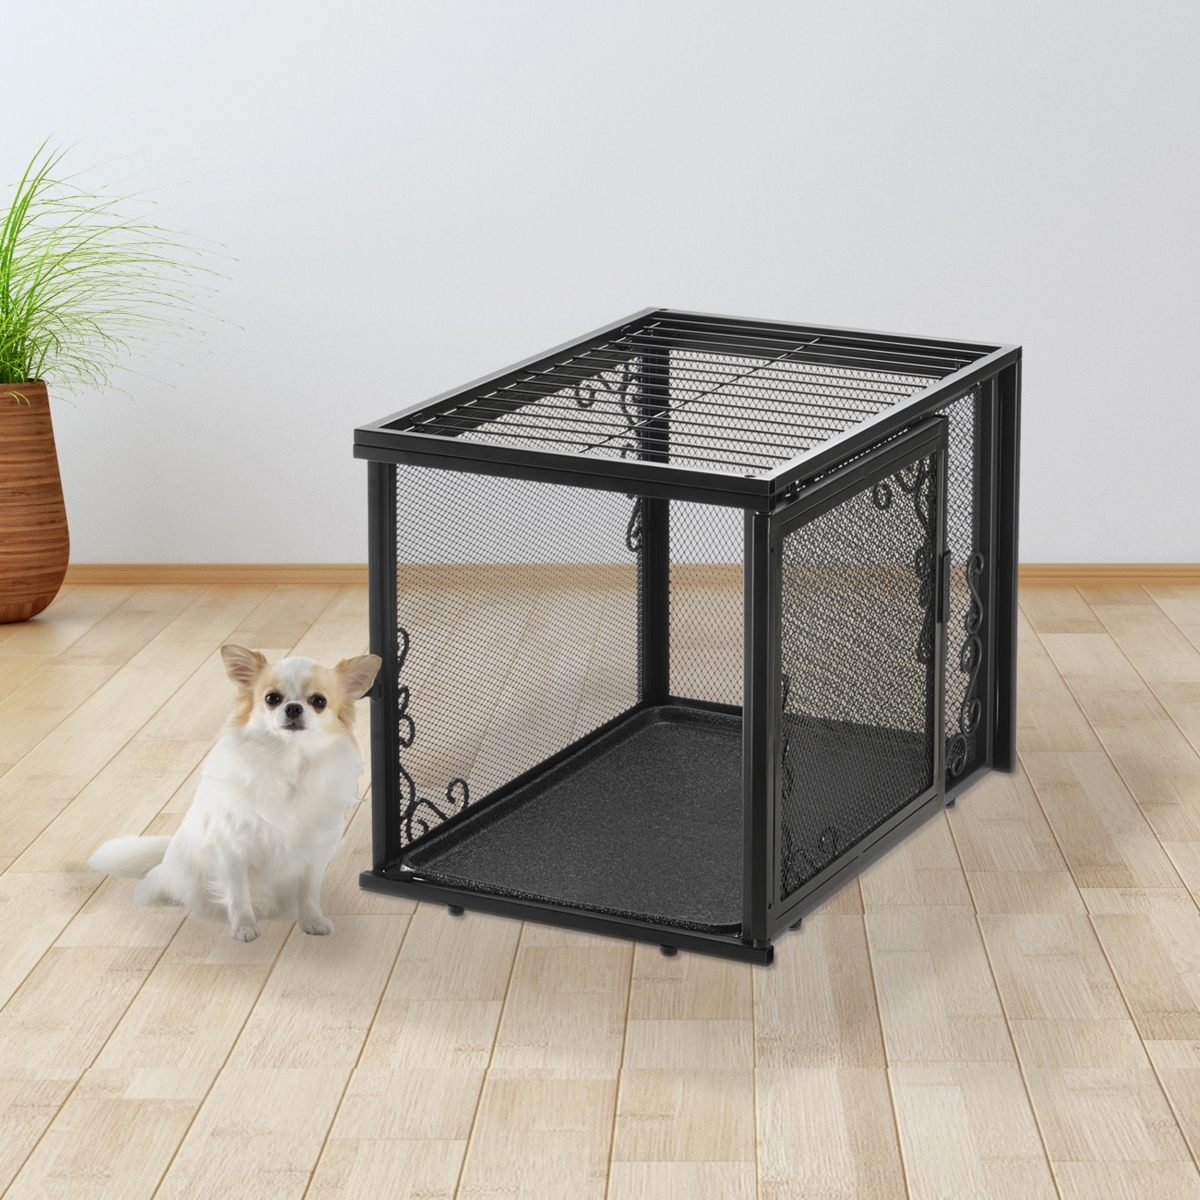 Picture of Richell 80015 Richell Metal Mesh Pet Crate Small in Black